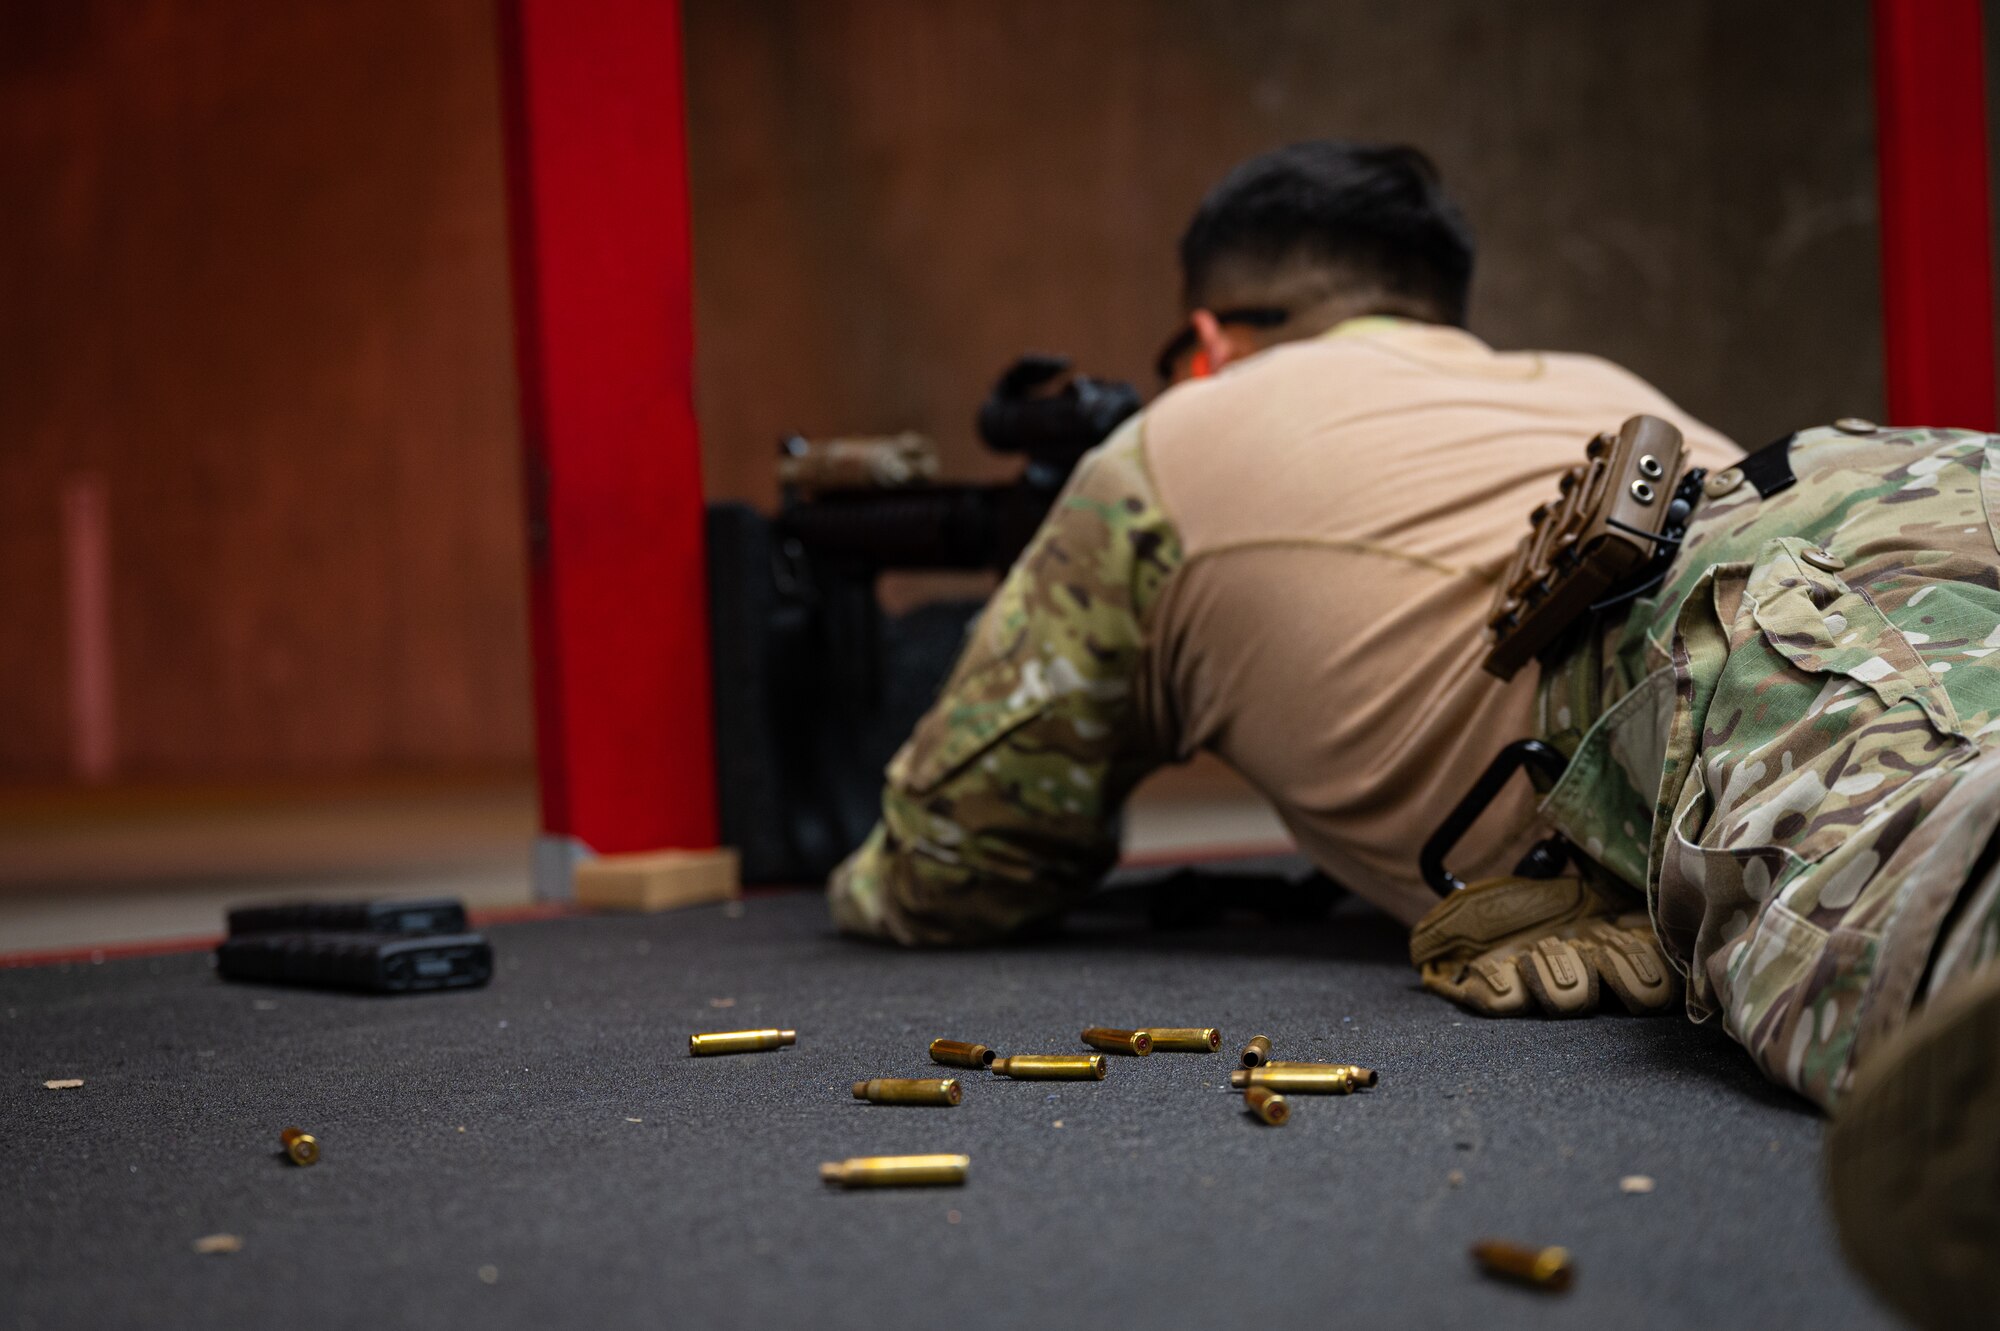 U.S. Air Force Staff Sgt. Christian Watters, 56th Security Forces Squadron patrolman, fires an M4A1 rifle during a weapons qualification course at the Combat Arms Training and Maintenance facility Aug. 3, 2021, at Luke Air Force Base, Arizona.